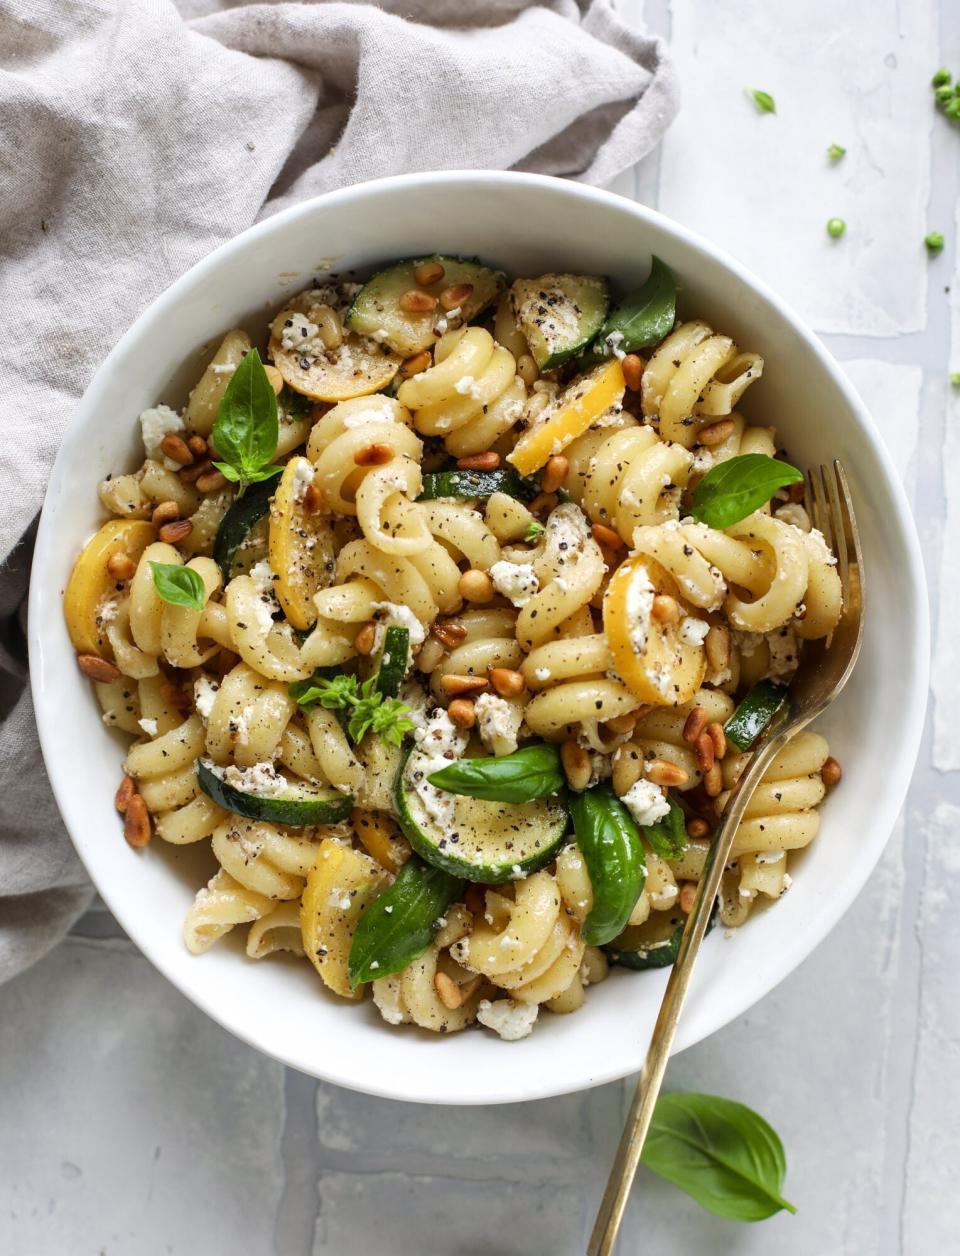 <strong><a href="https://www.howsweeteats.com/2019/07/summer-squash-pasta/" target="_blank" rel="noopener noreferrer">Get the 20-Minute Summer Squash Pasta with Brown Butter and Goat Cheese recipe from How Sweet Eats</a></strong>